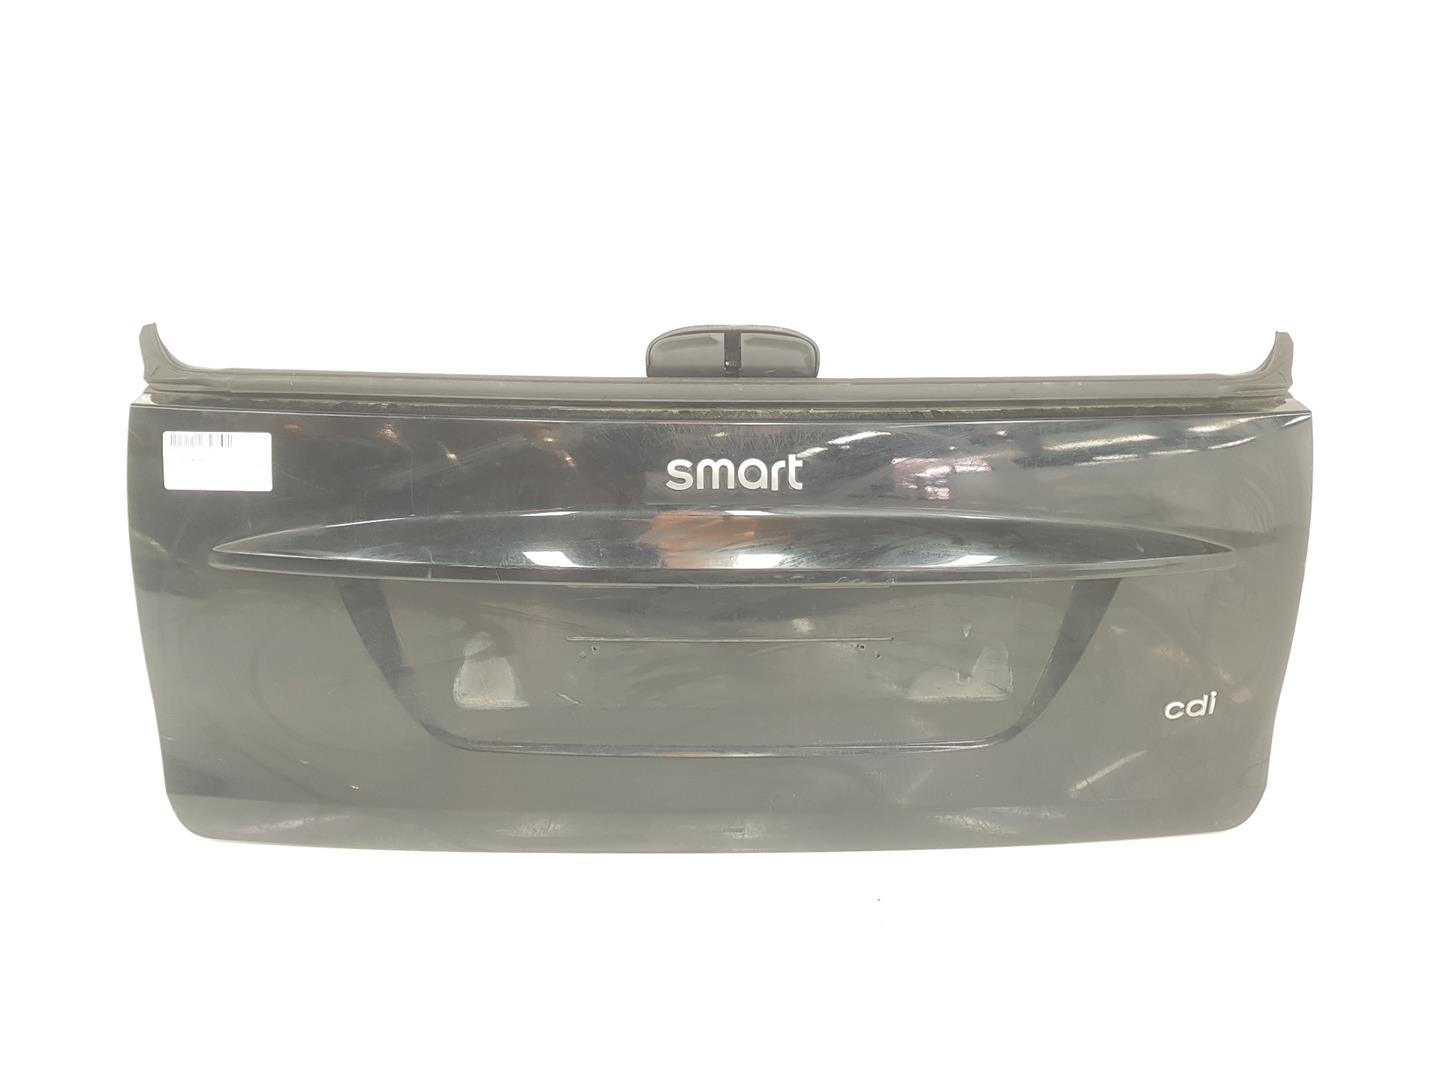 SMART Fortwo 2 generation (2007-2015) Bootlid Rear Boot A4517570006, A4517570006, COLORNEGROECA 19837095